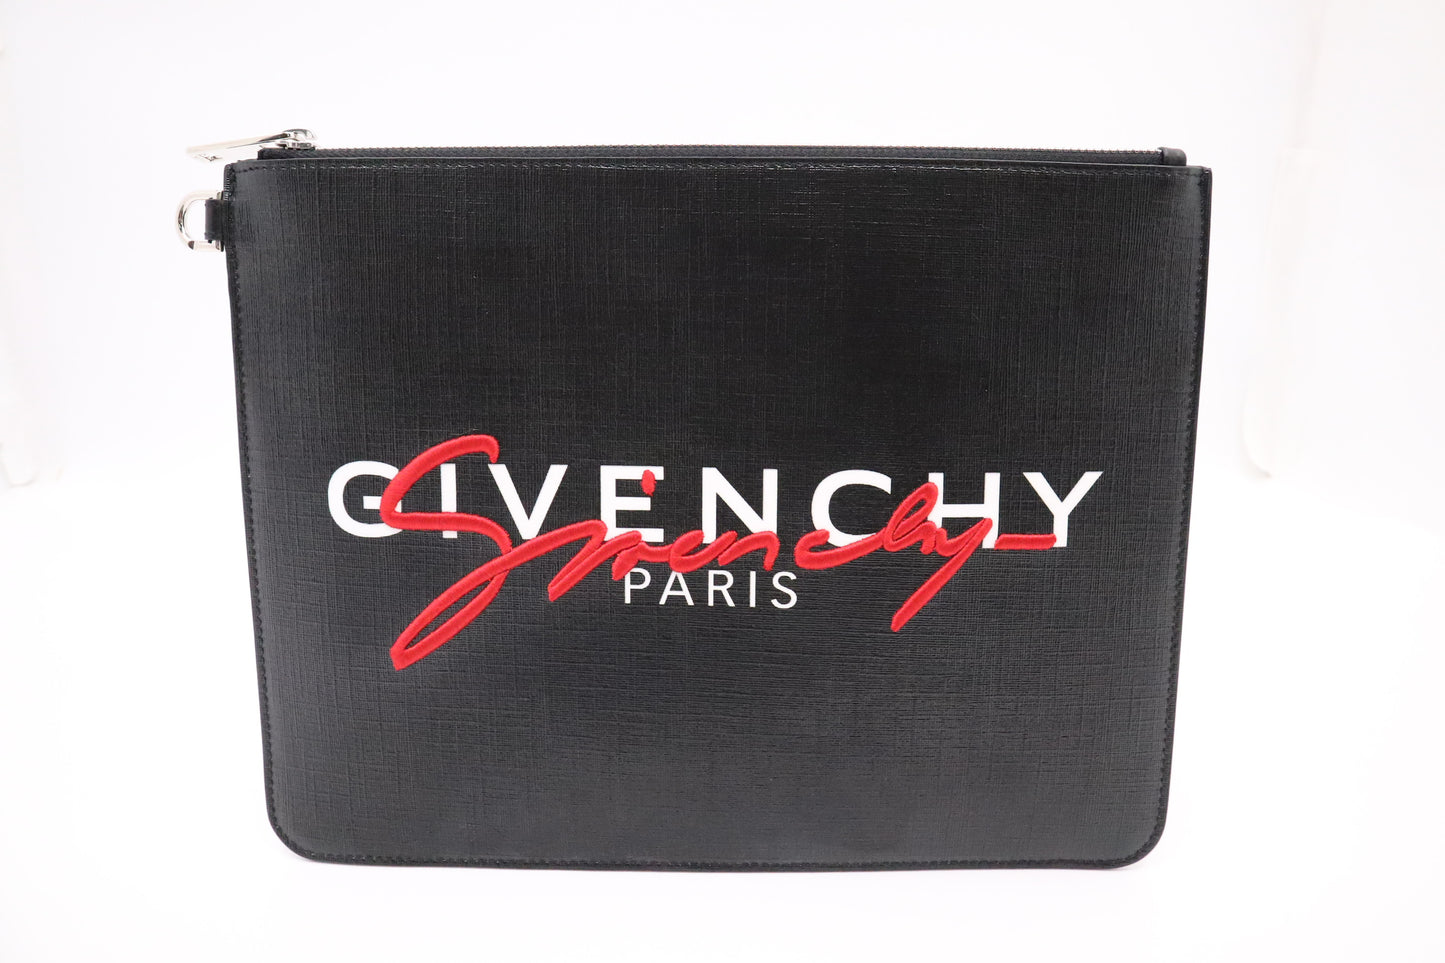 Givenchy Pouch in Black Canvas